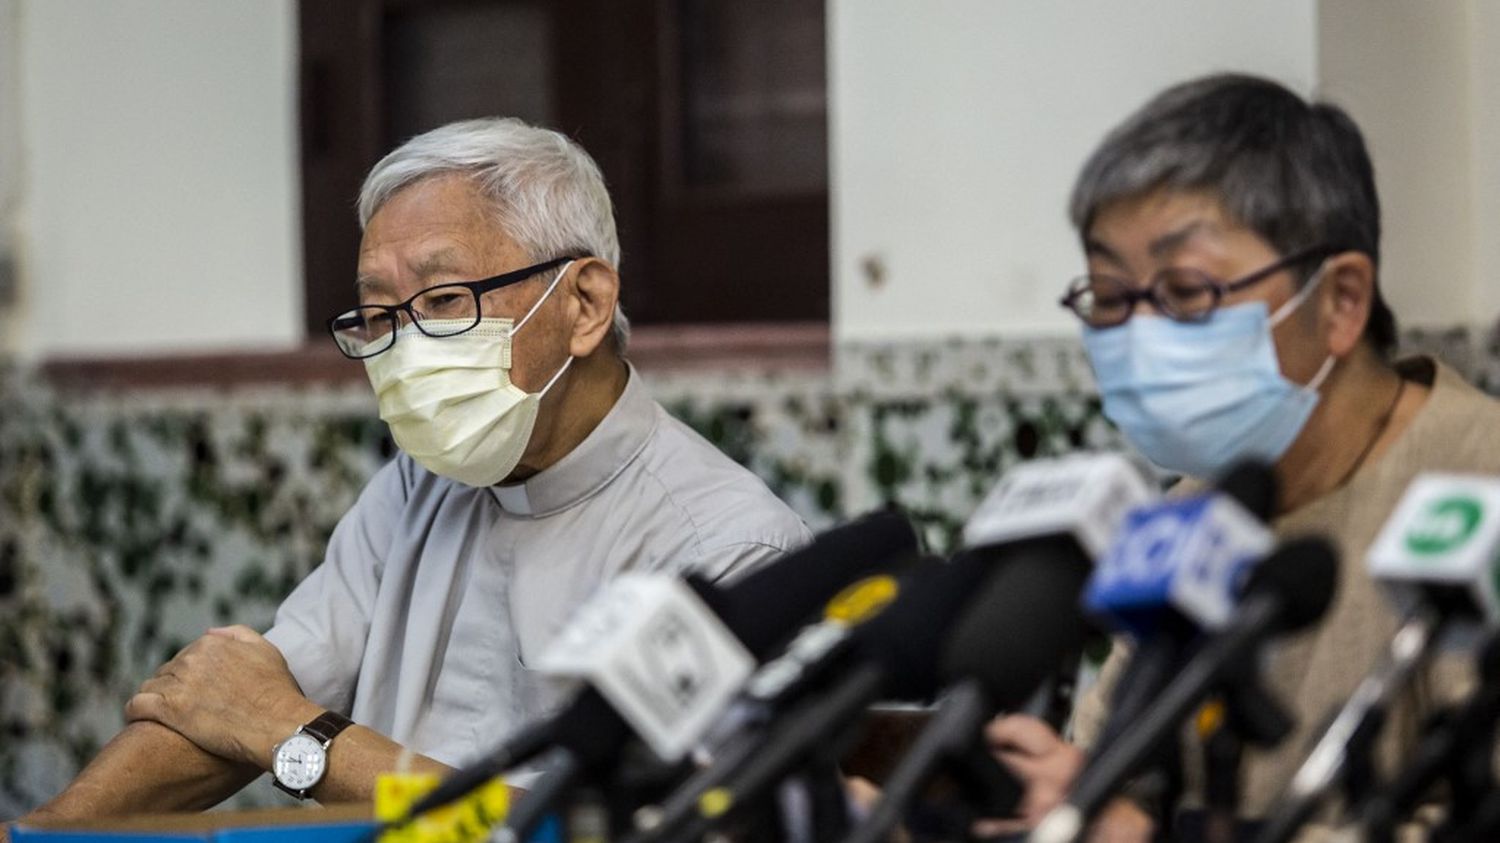 Hong Kong: a pro-democracy cardinal released on bail after being arrested by the authorities
